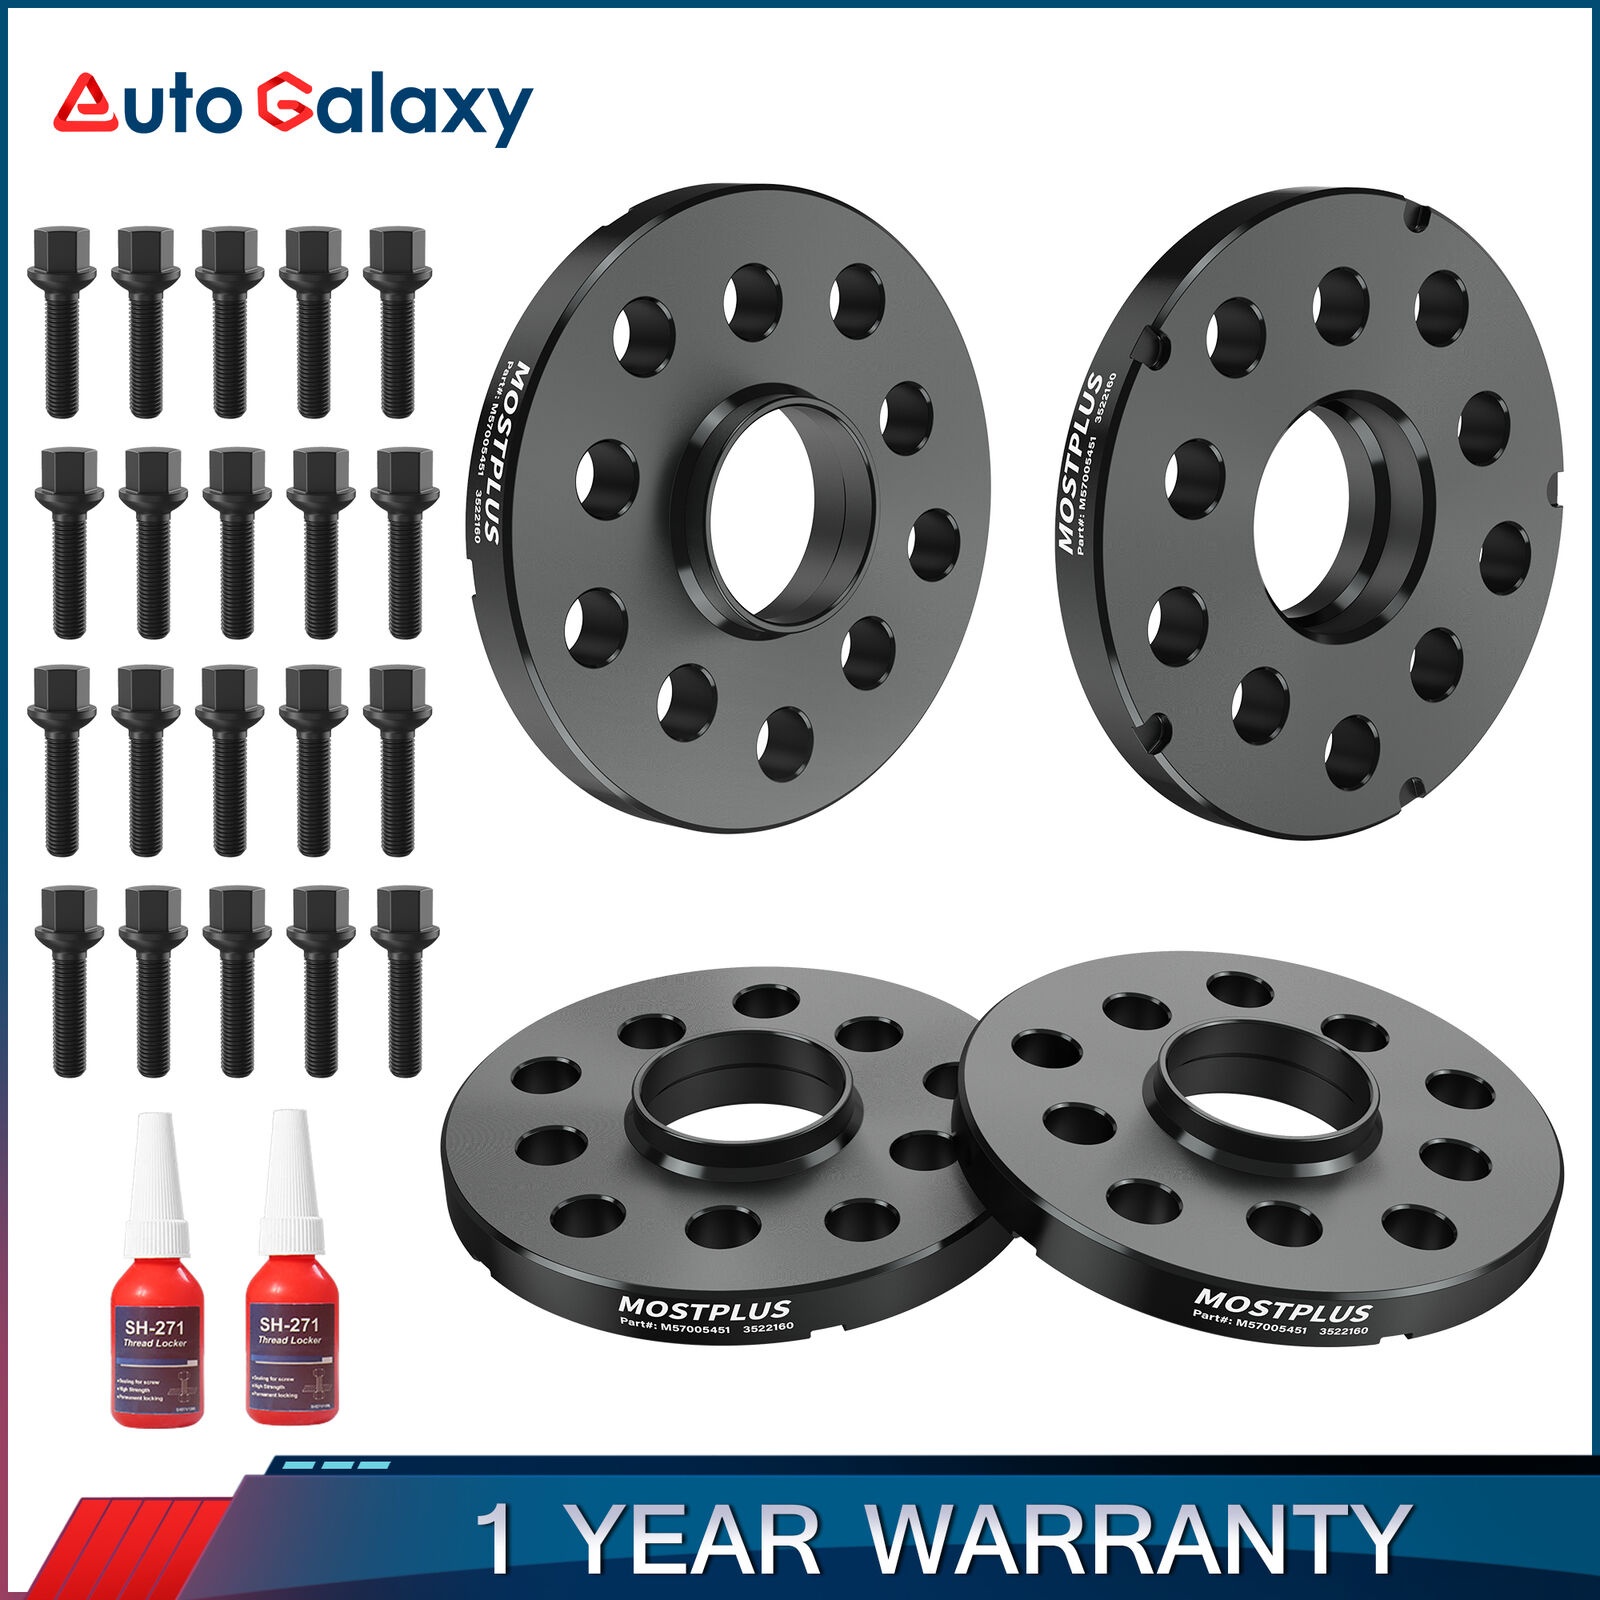 4X 5x100mm/5x112mm Wheel Spacers & 20 Lug Bolts For Audi A6 S4 A4 A3 VW Jetta CC